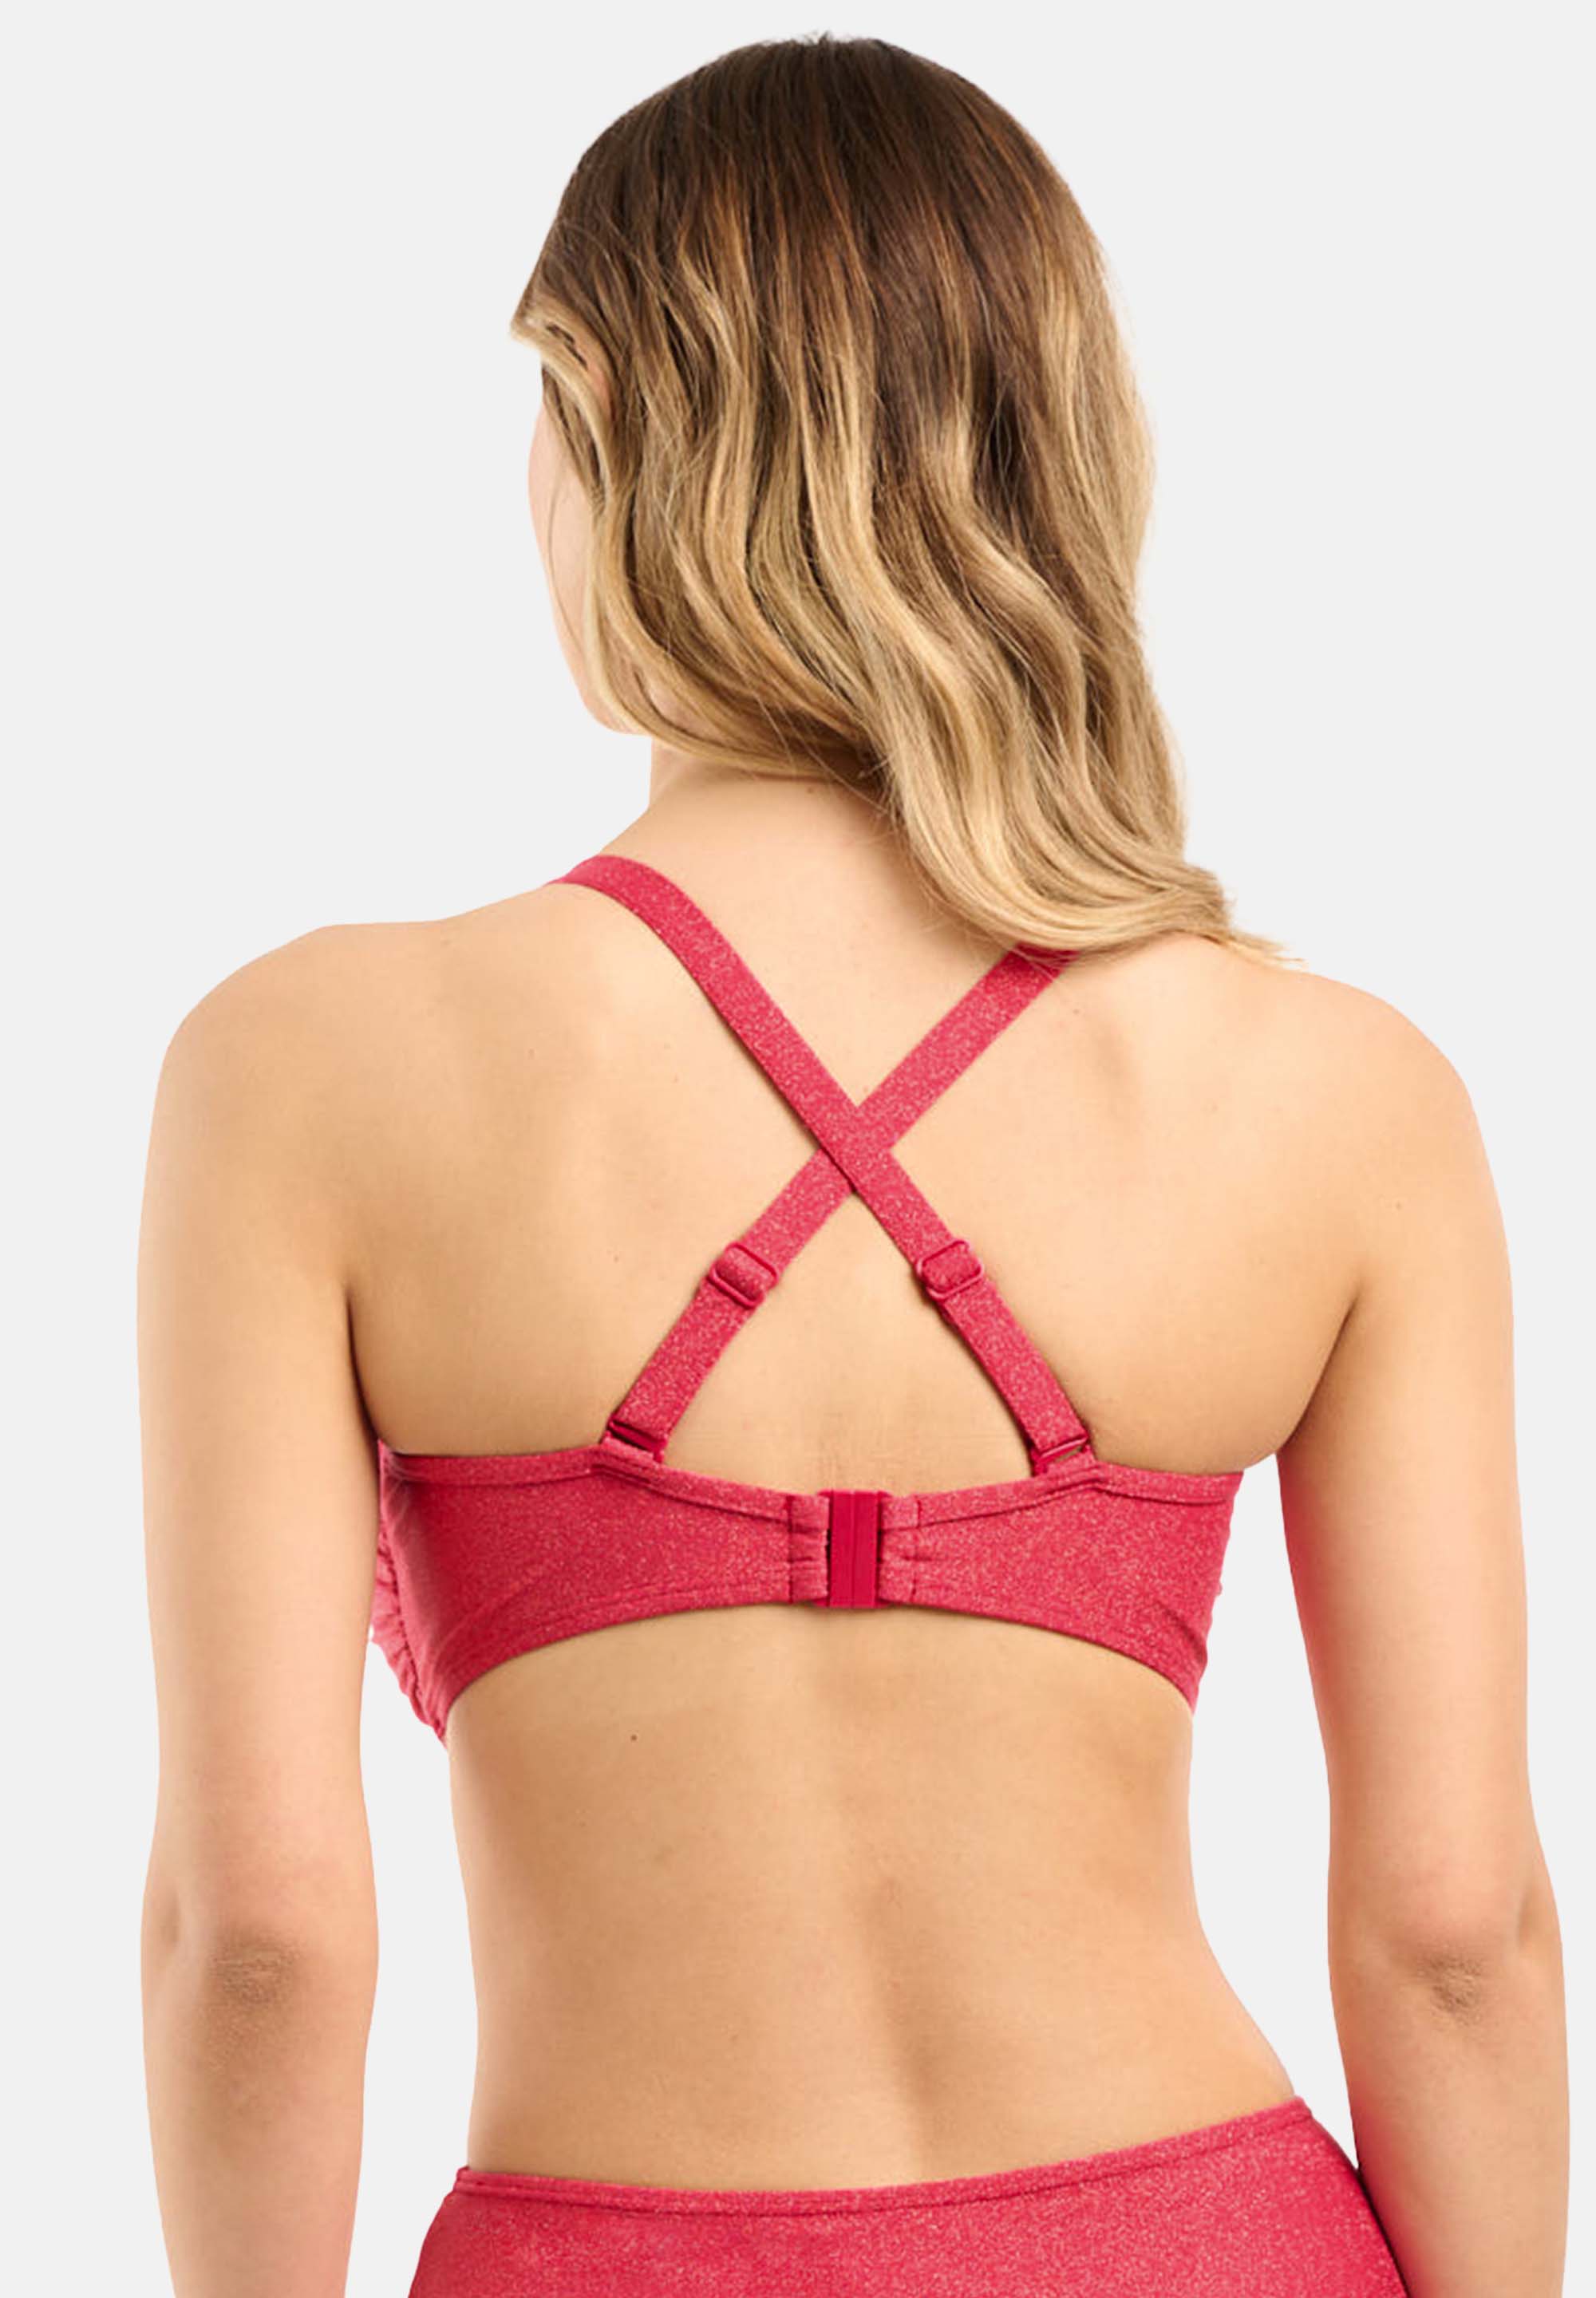 Reflet Cerise underwired bandeau swimsuit top